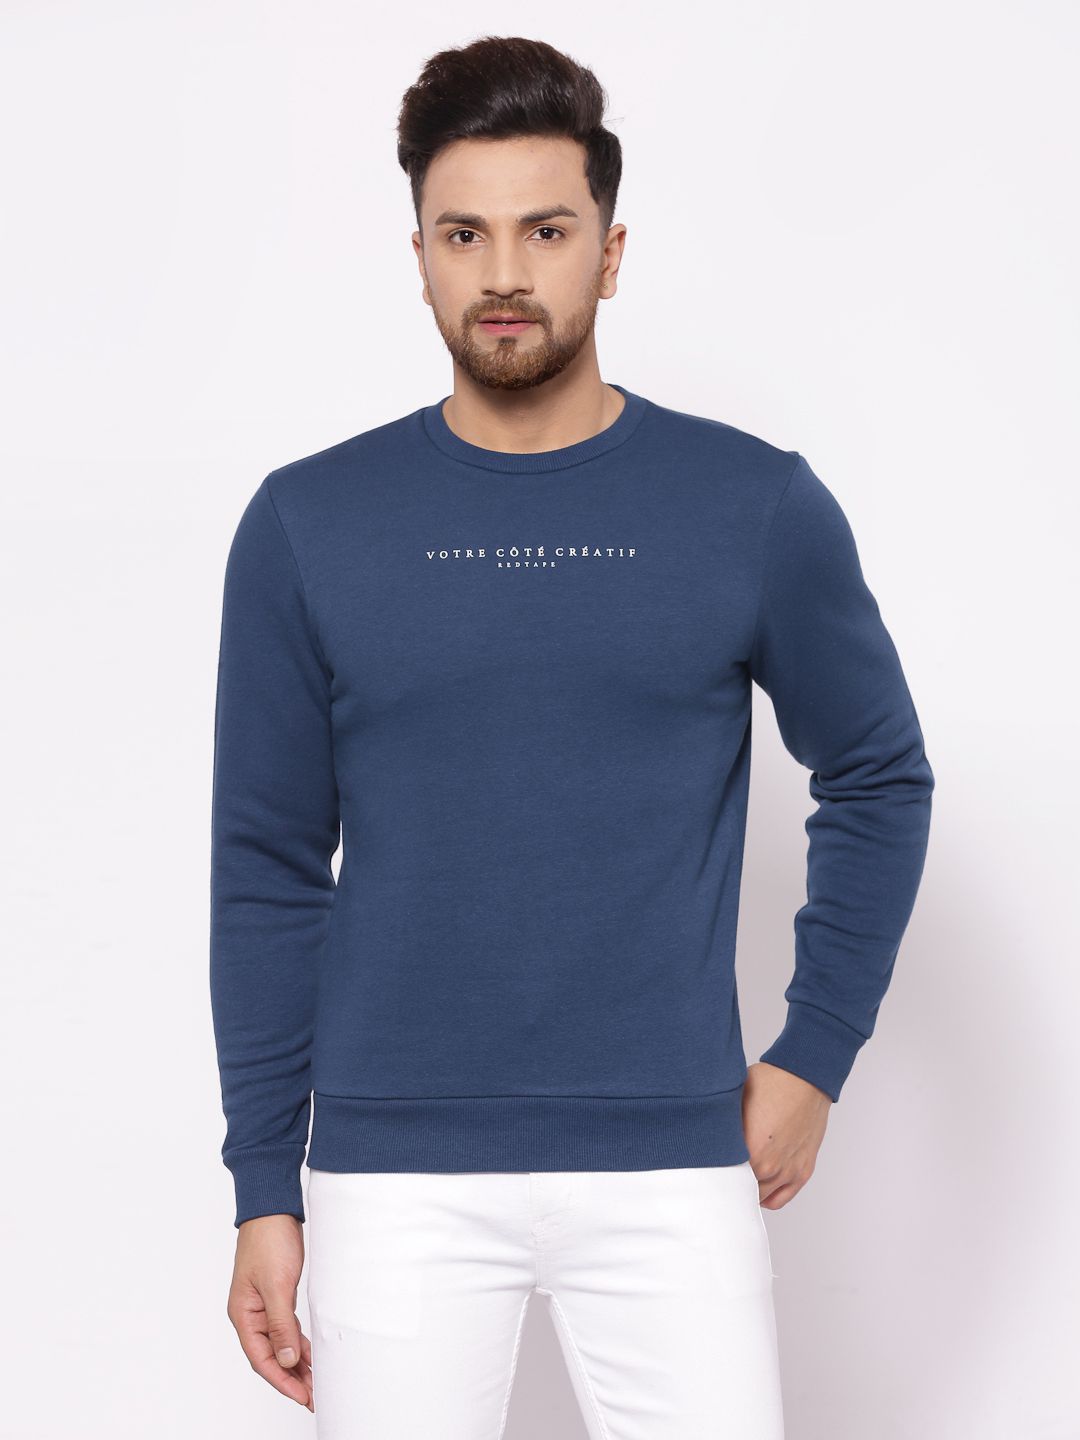     			Red Tape Cotton Blend Round Neck Men's Sweatshirt - Teal ( Pack of 1 )